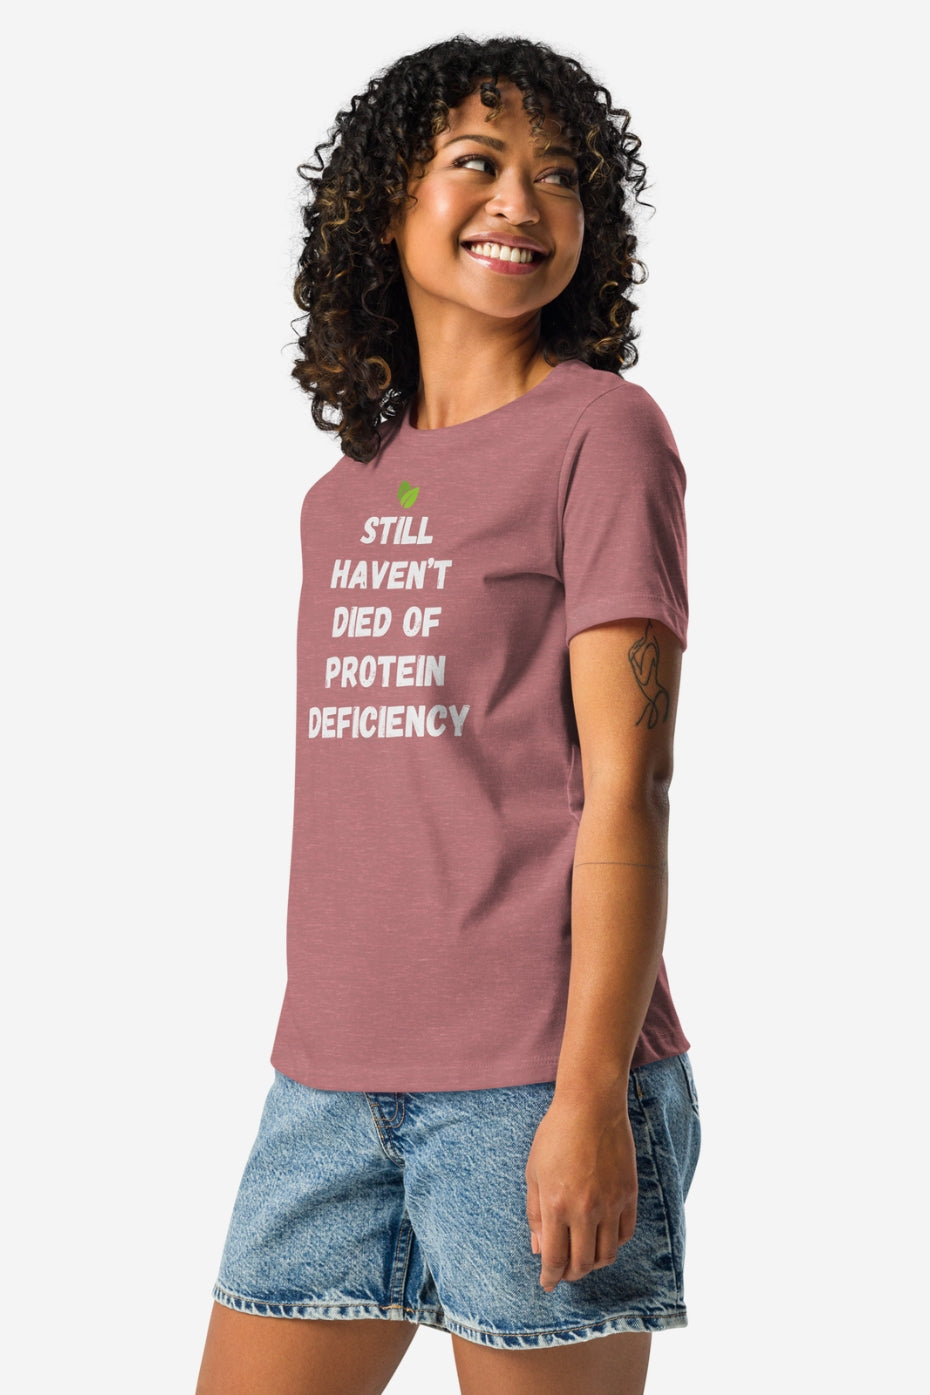 No Protein Deficiency Women's Relaxed T-Shirt